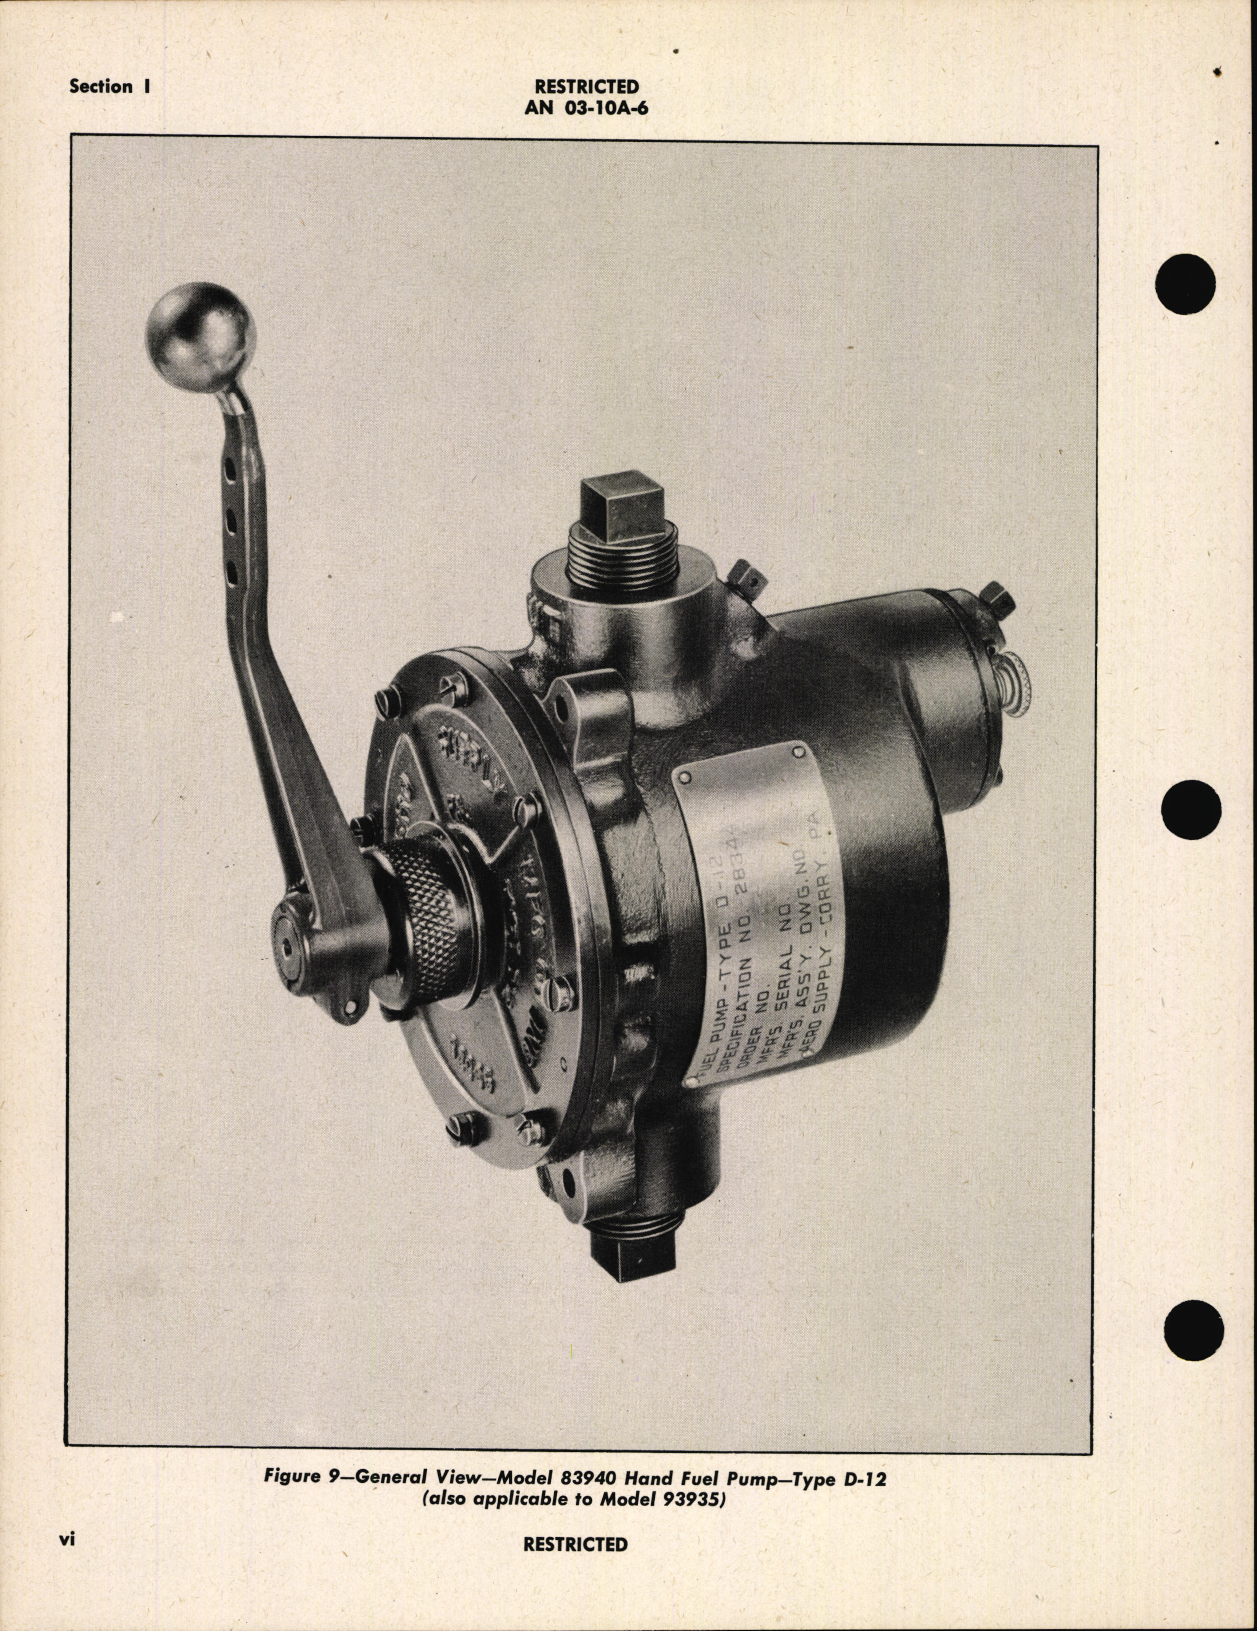 Sample page 8 from AirCorps Library document: Handbook of Instructions with Parts Catalog for Fuel System Units, Hand Fuel Pumps, Fuel System Strainers, and Relief Valves